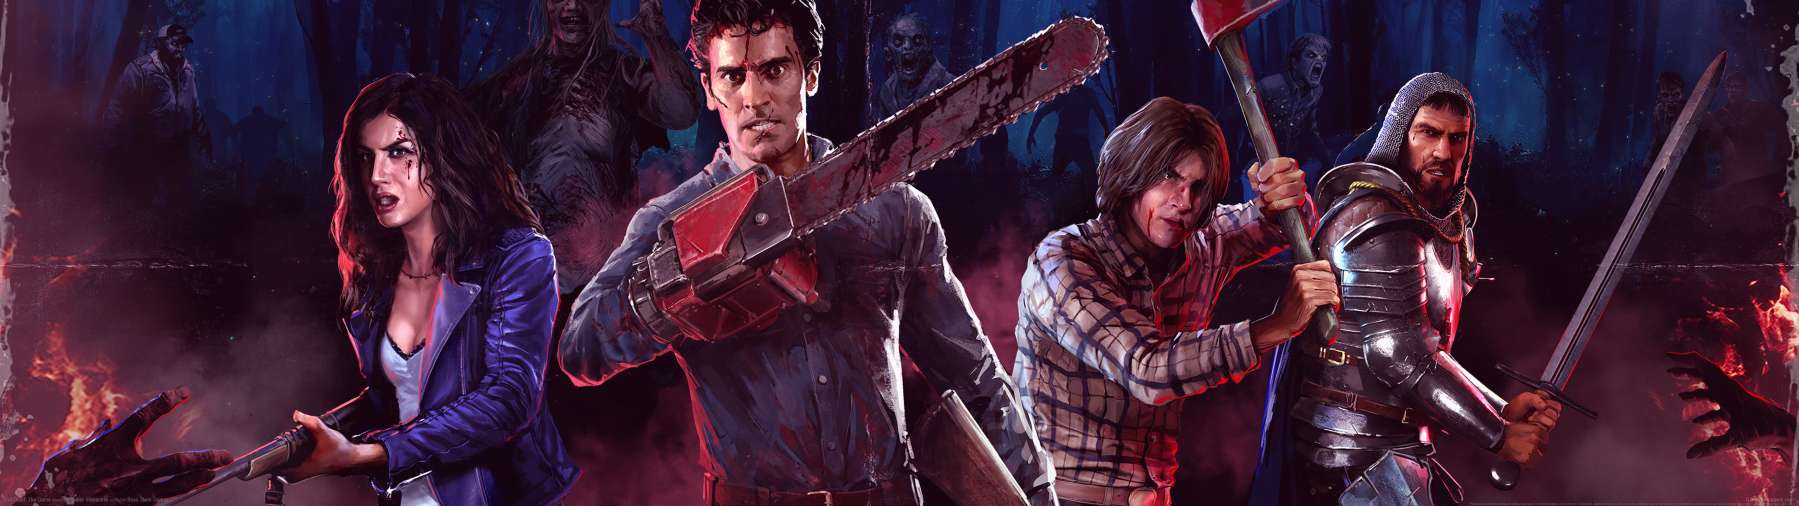 Evil Dead: The Game superwide wallpaper or background 01